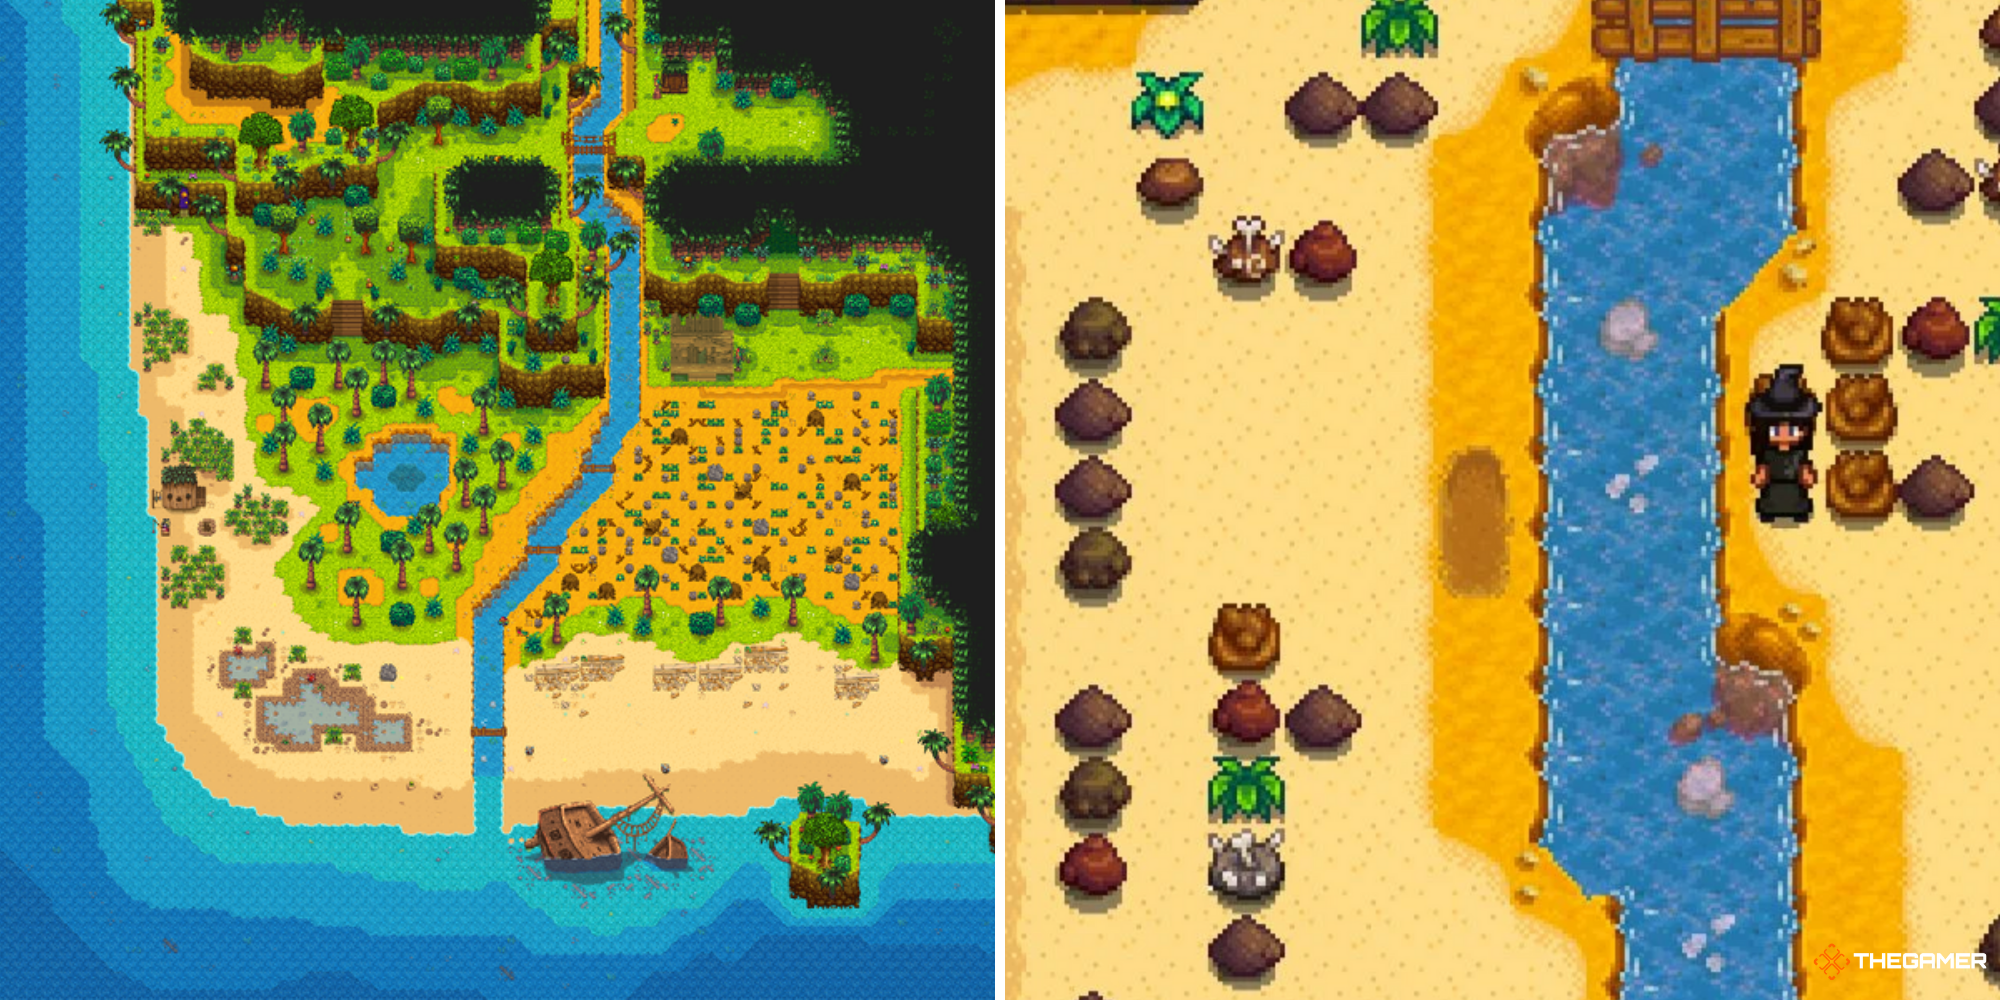 Stardew Valley Ginger Island - Island west on left, player at the dig site on right